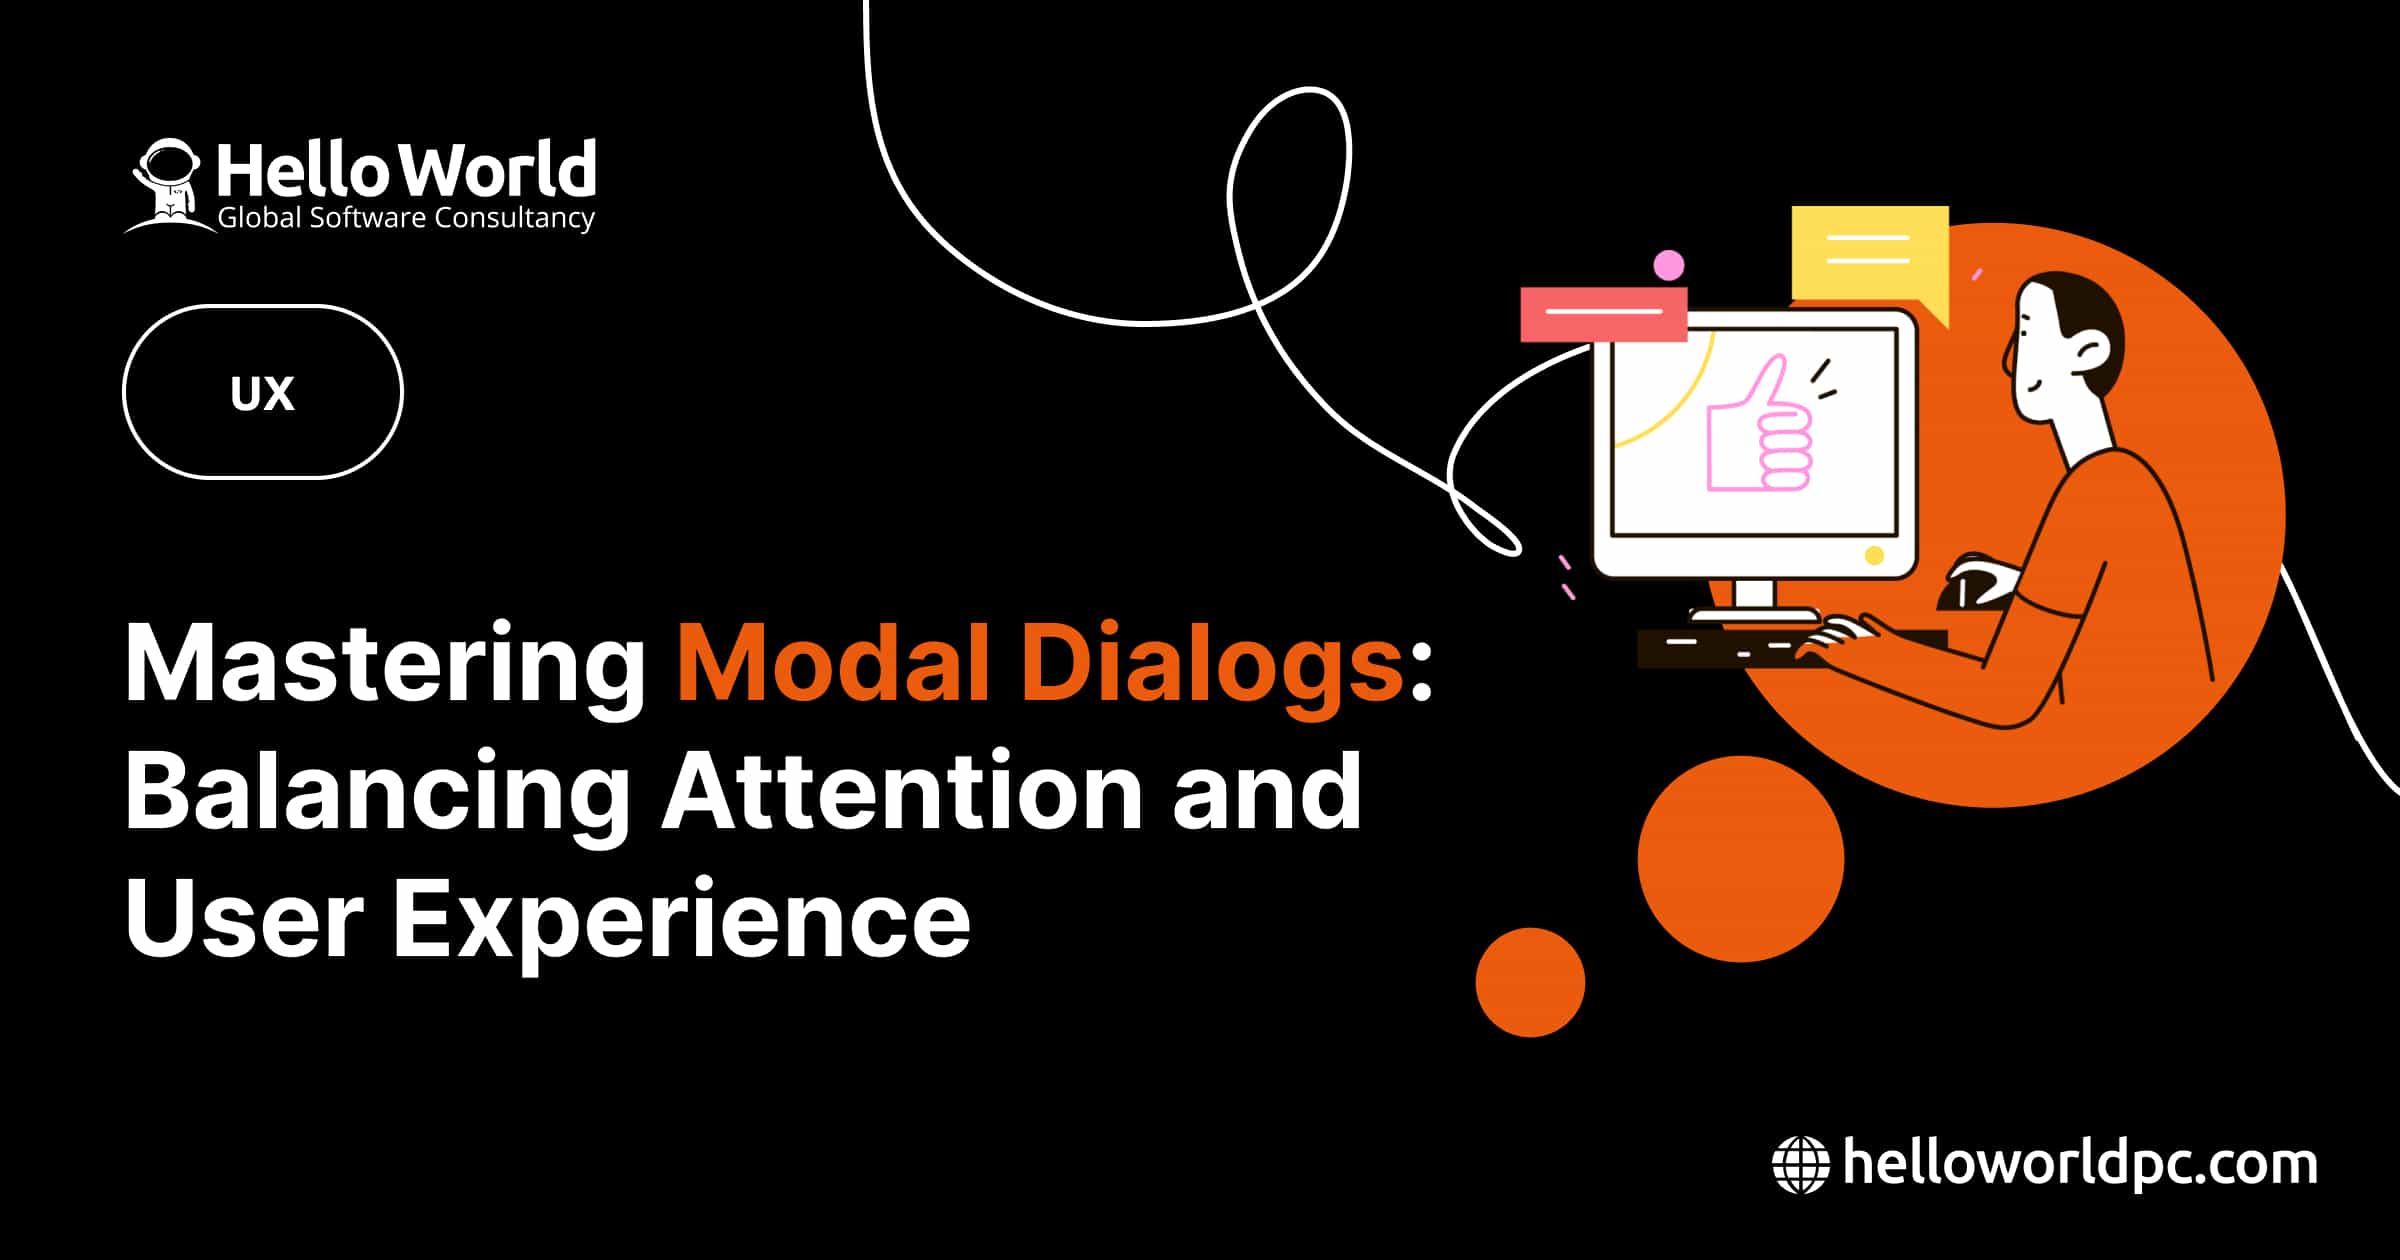 Mastering Modal Dialogs: Balancing Attention and User Experience